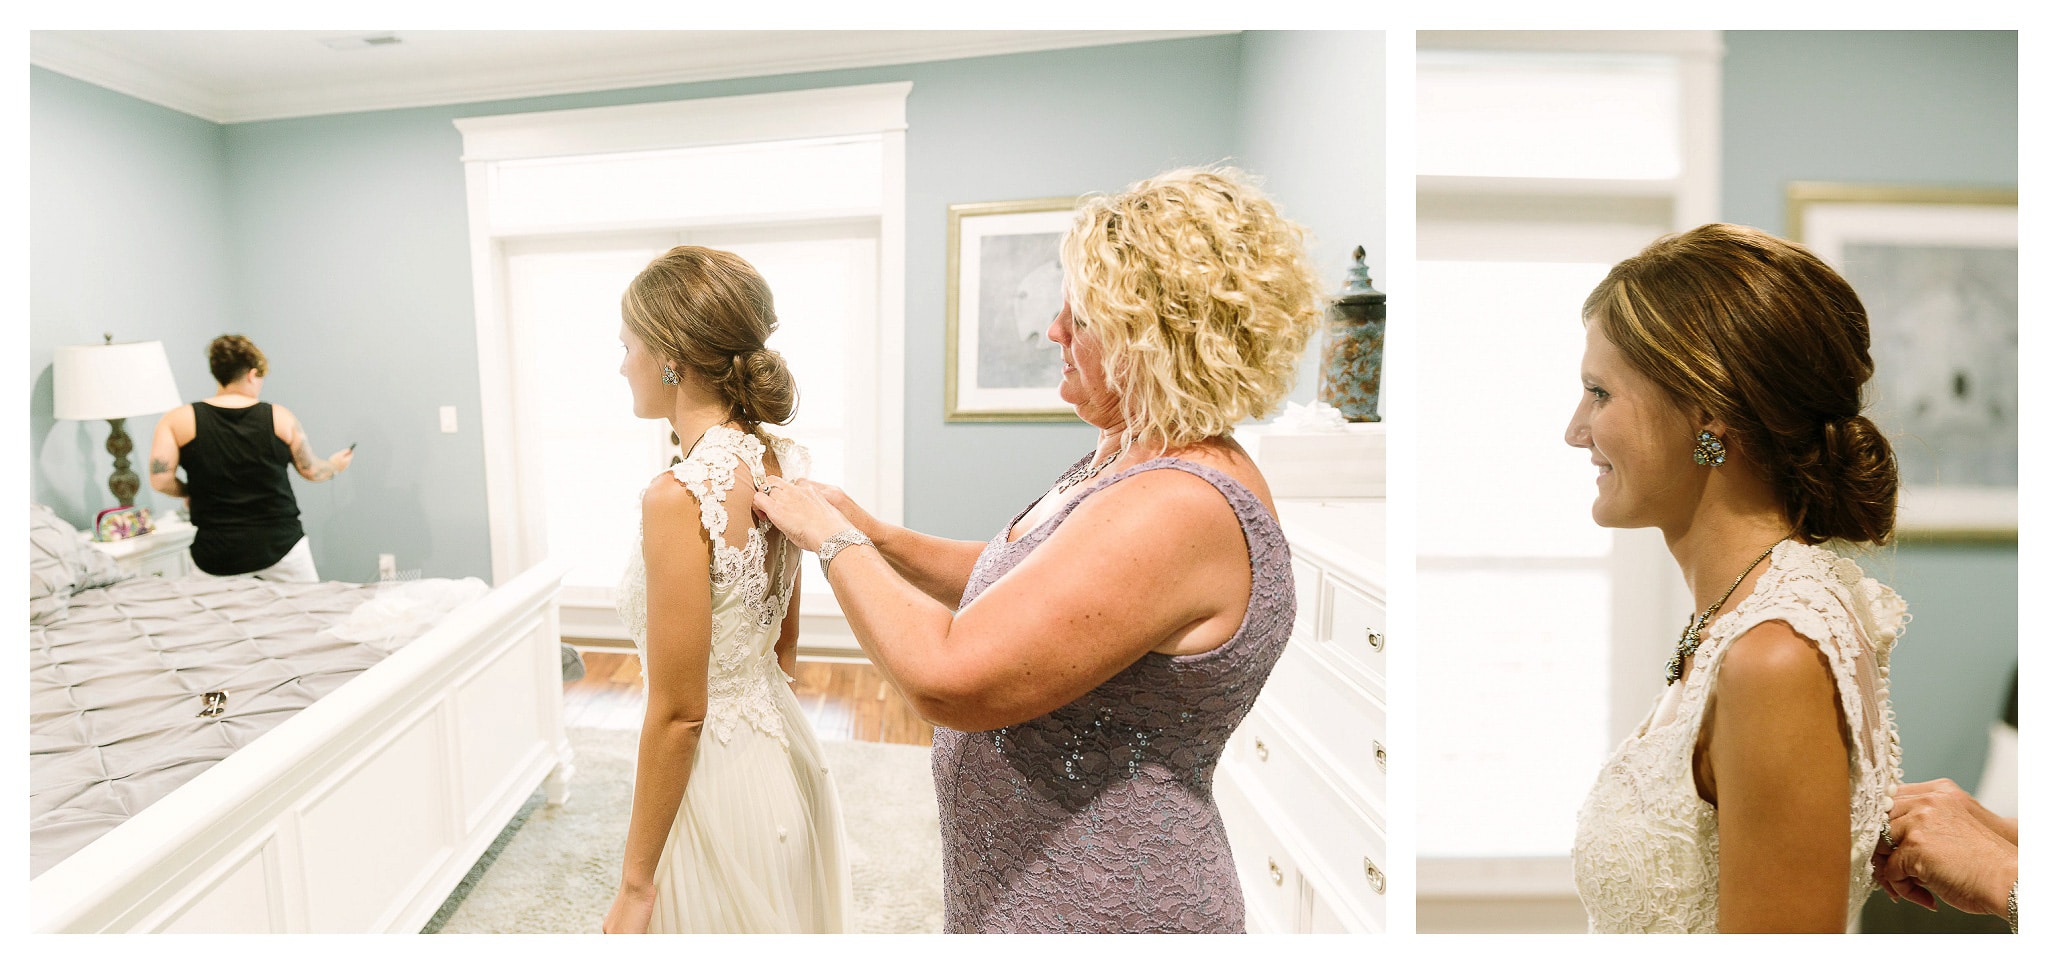 Time to Get Changed New dress for the Bride - Venue - Beach House Gulf Stream Breeze, Beach Realty Catering and Cake - Buttercream Cakes and Catering, LLC Flowers - Callas Florist Event Rentals - Event Works DJ - Scott Shaw